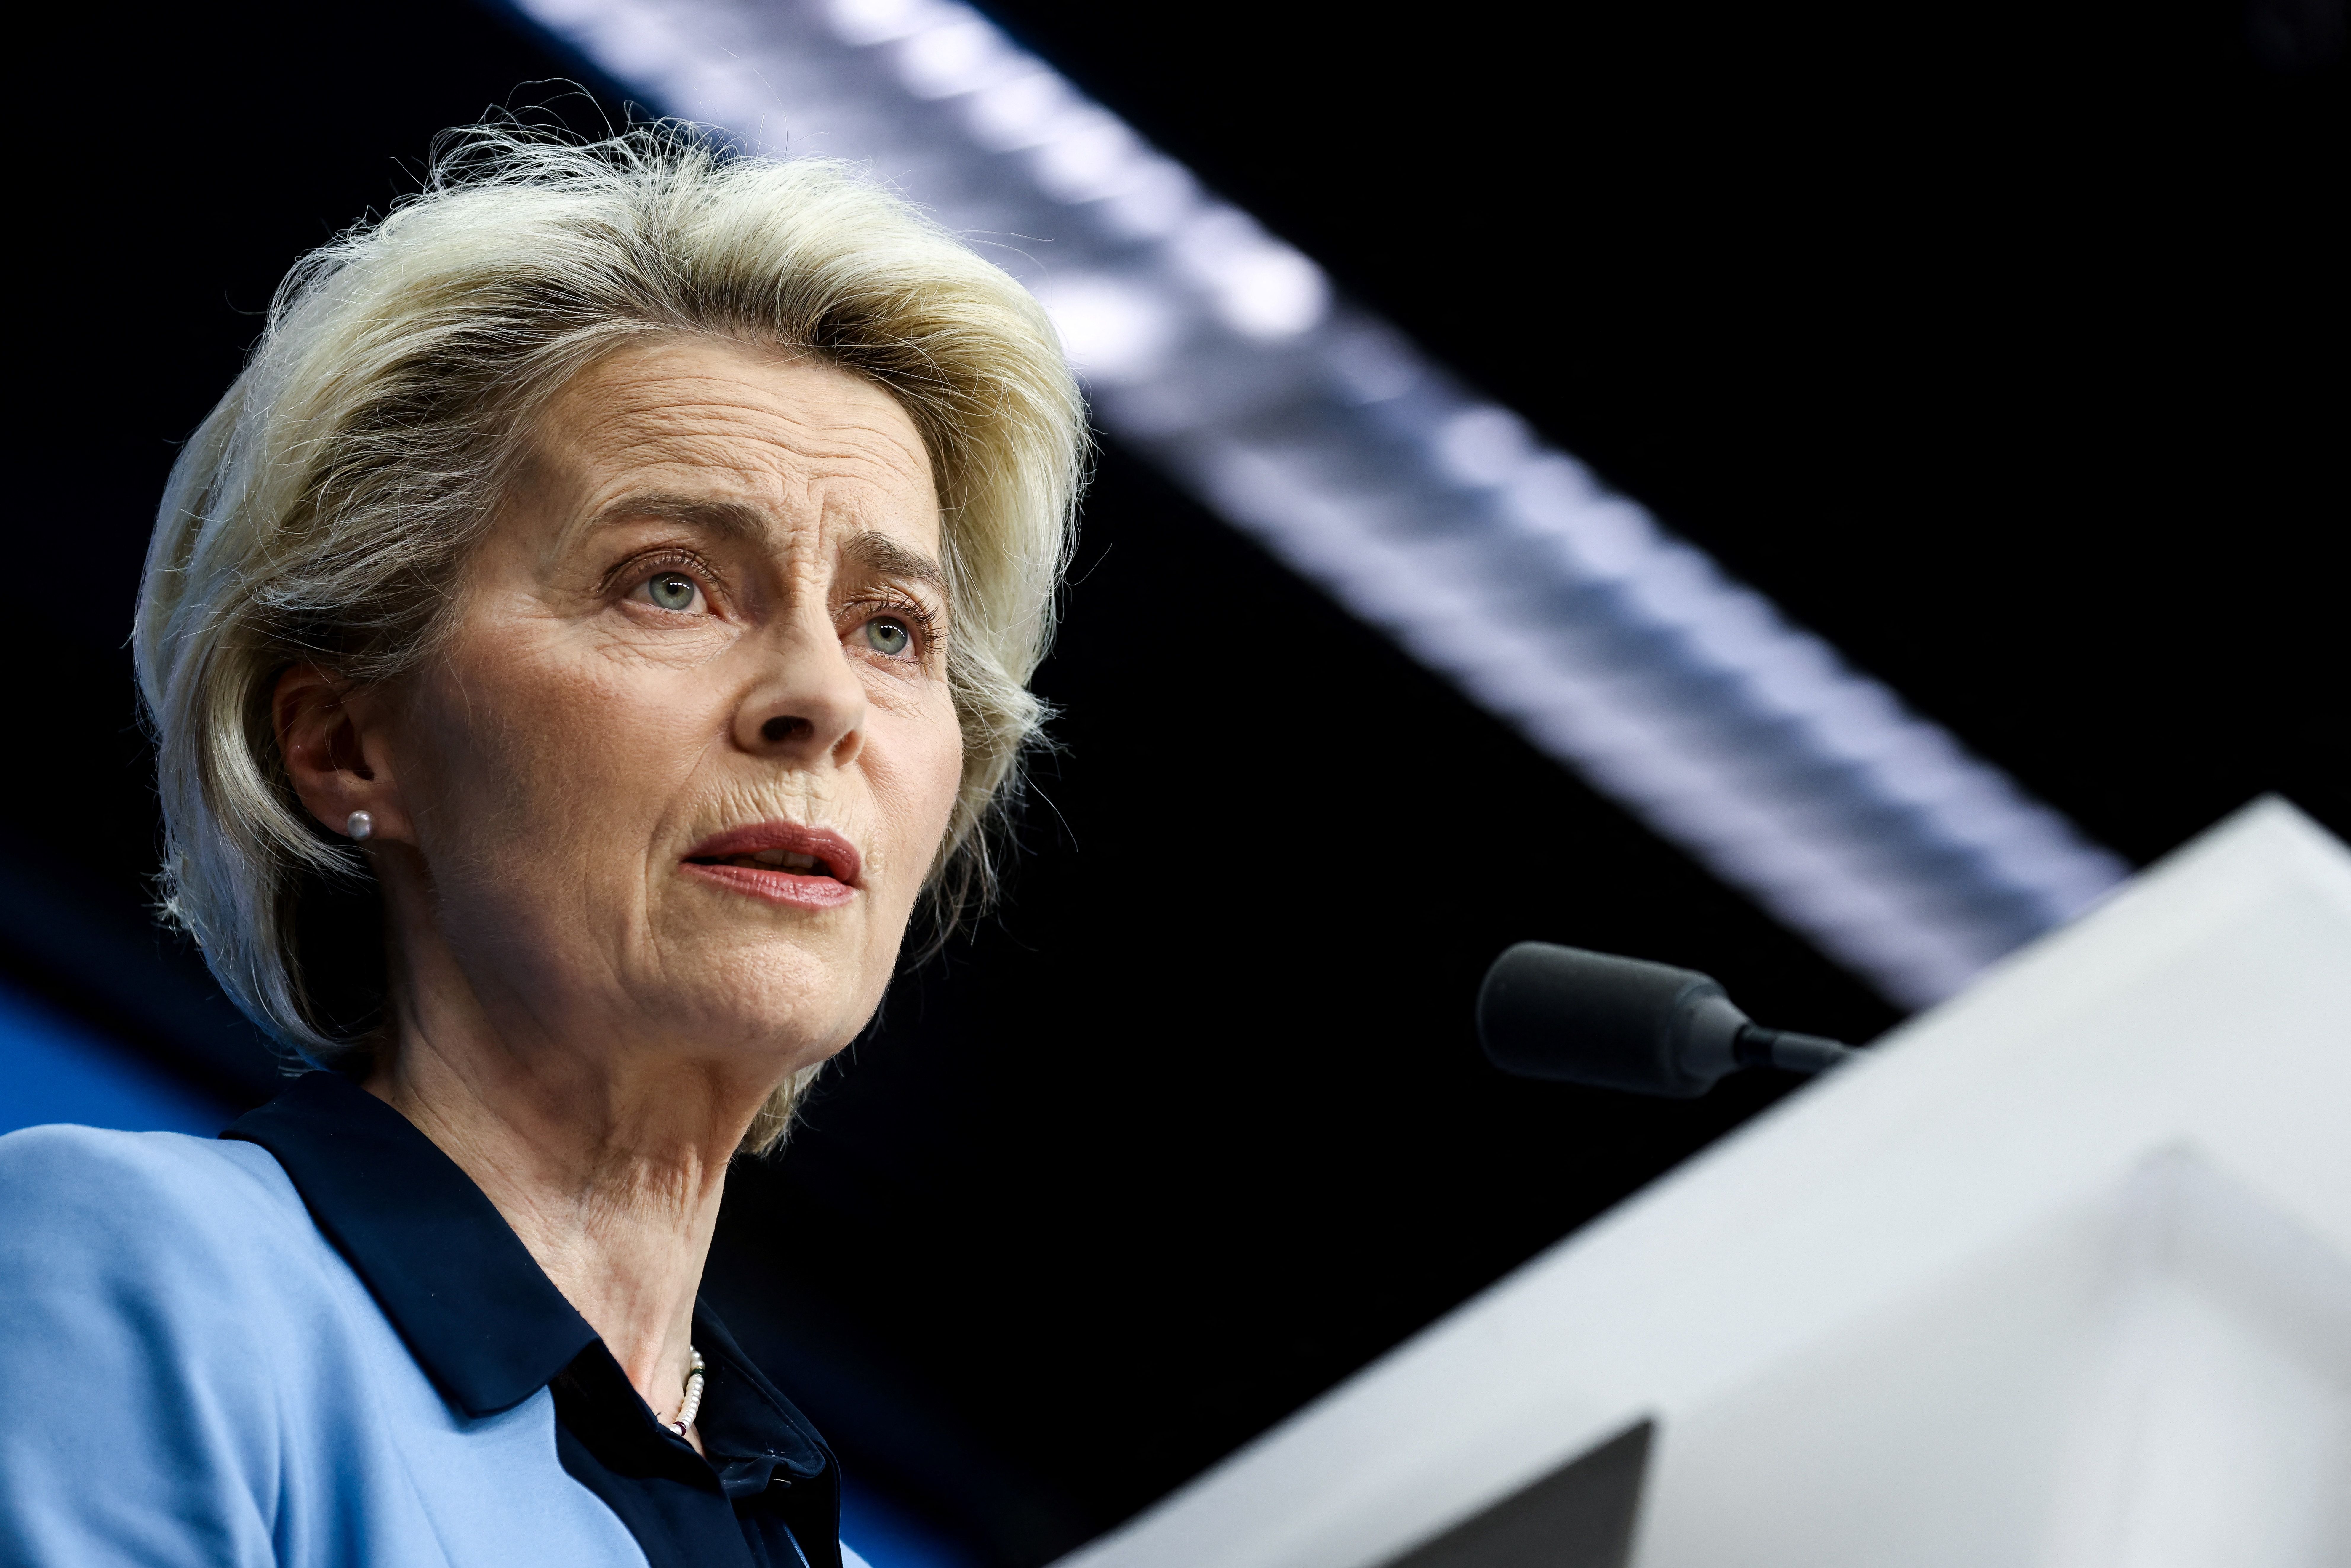 European Commission President Ursula von der Leyen speaks during a press conference after a virtual summit with China's President in Brussels, Belgium, on April 1.